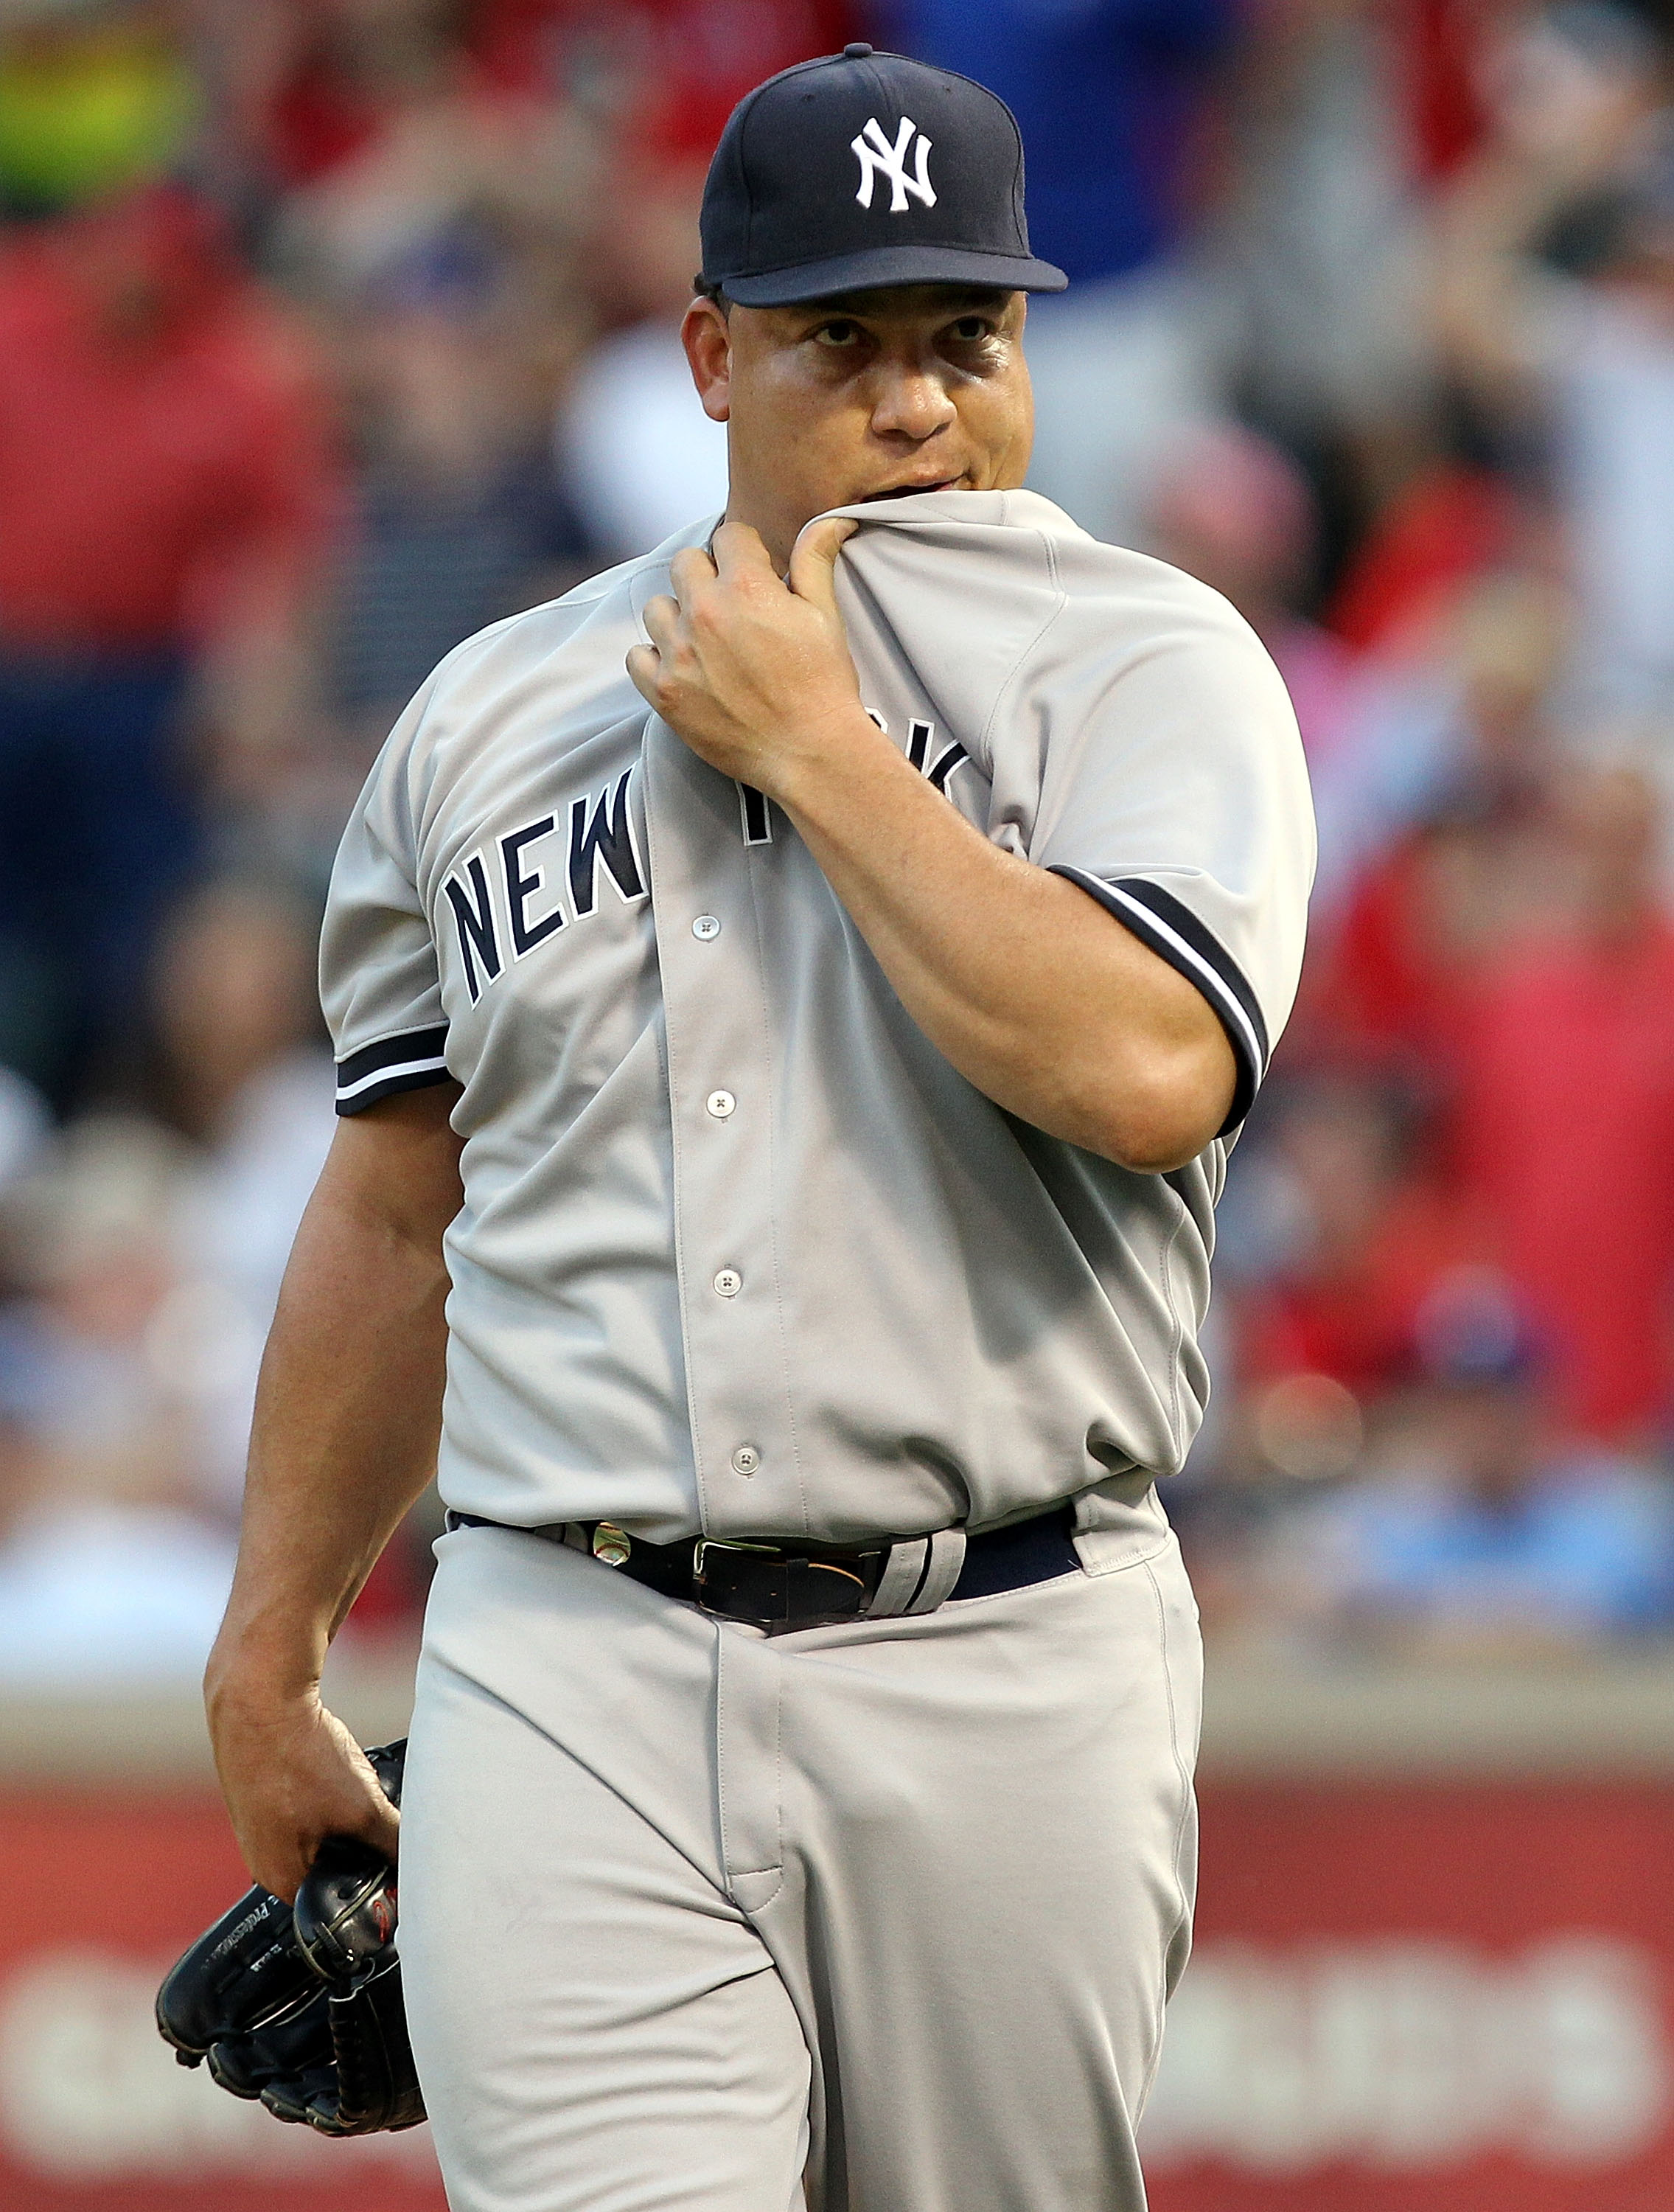 How long can Bartolo Colon keep pitching like this?